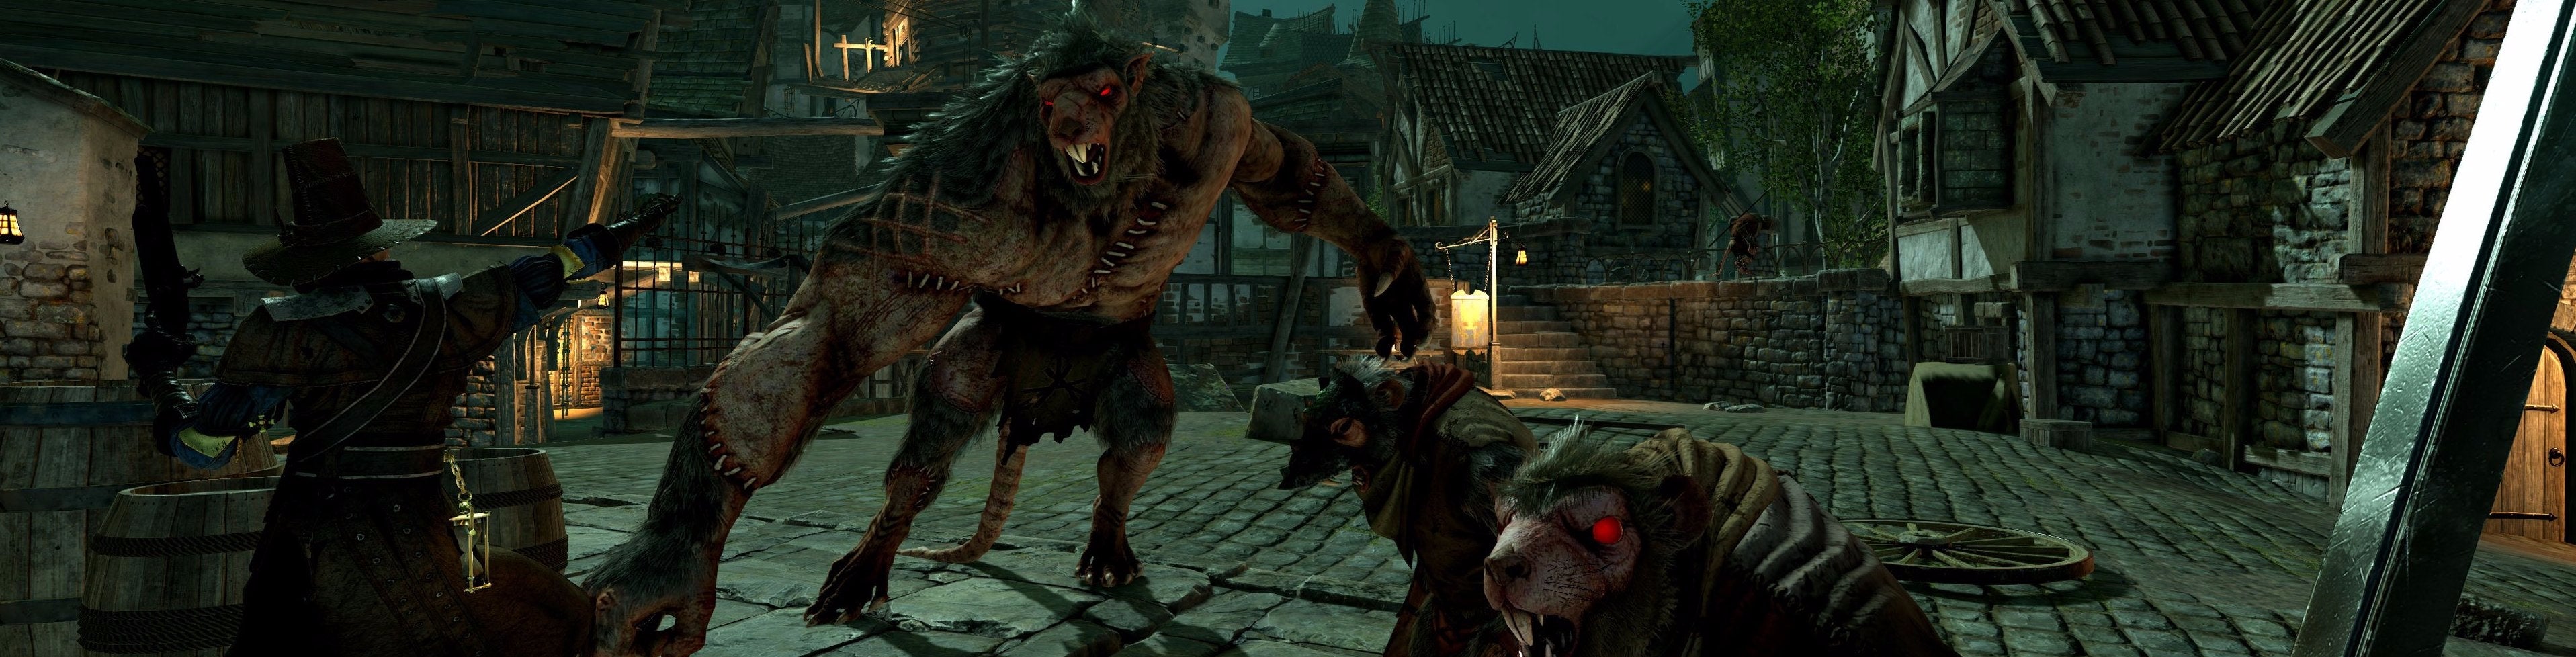 Image for Unsung games of 2015: Warhammer: End Times - Vermintide